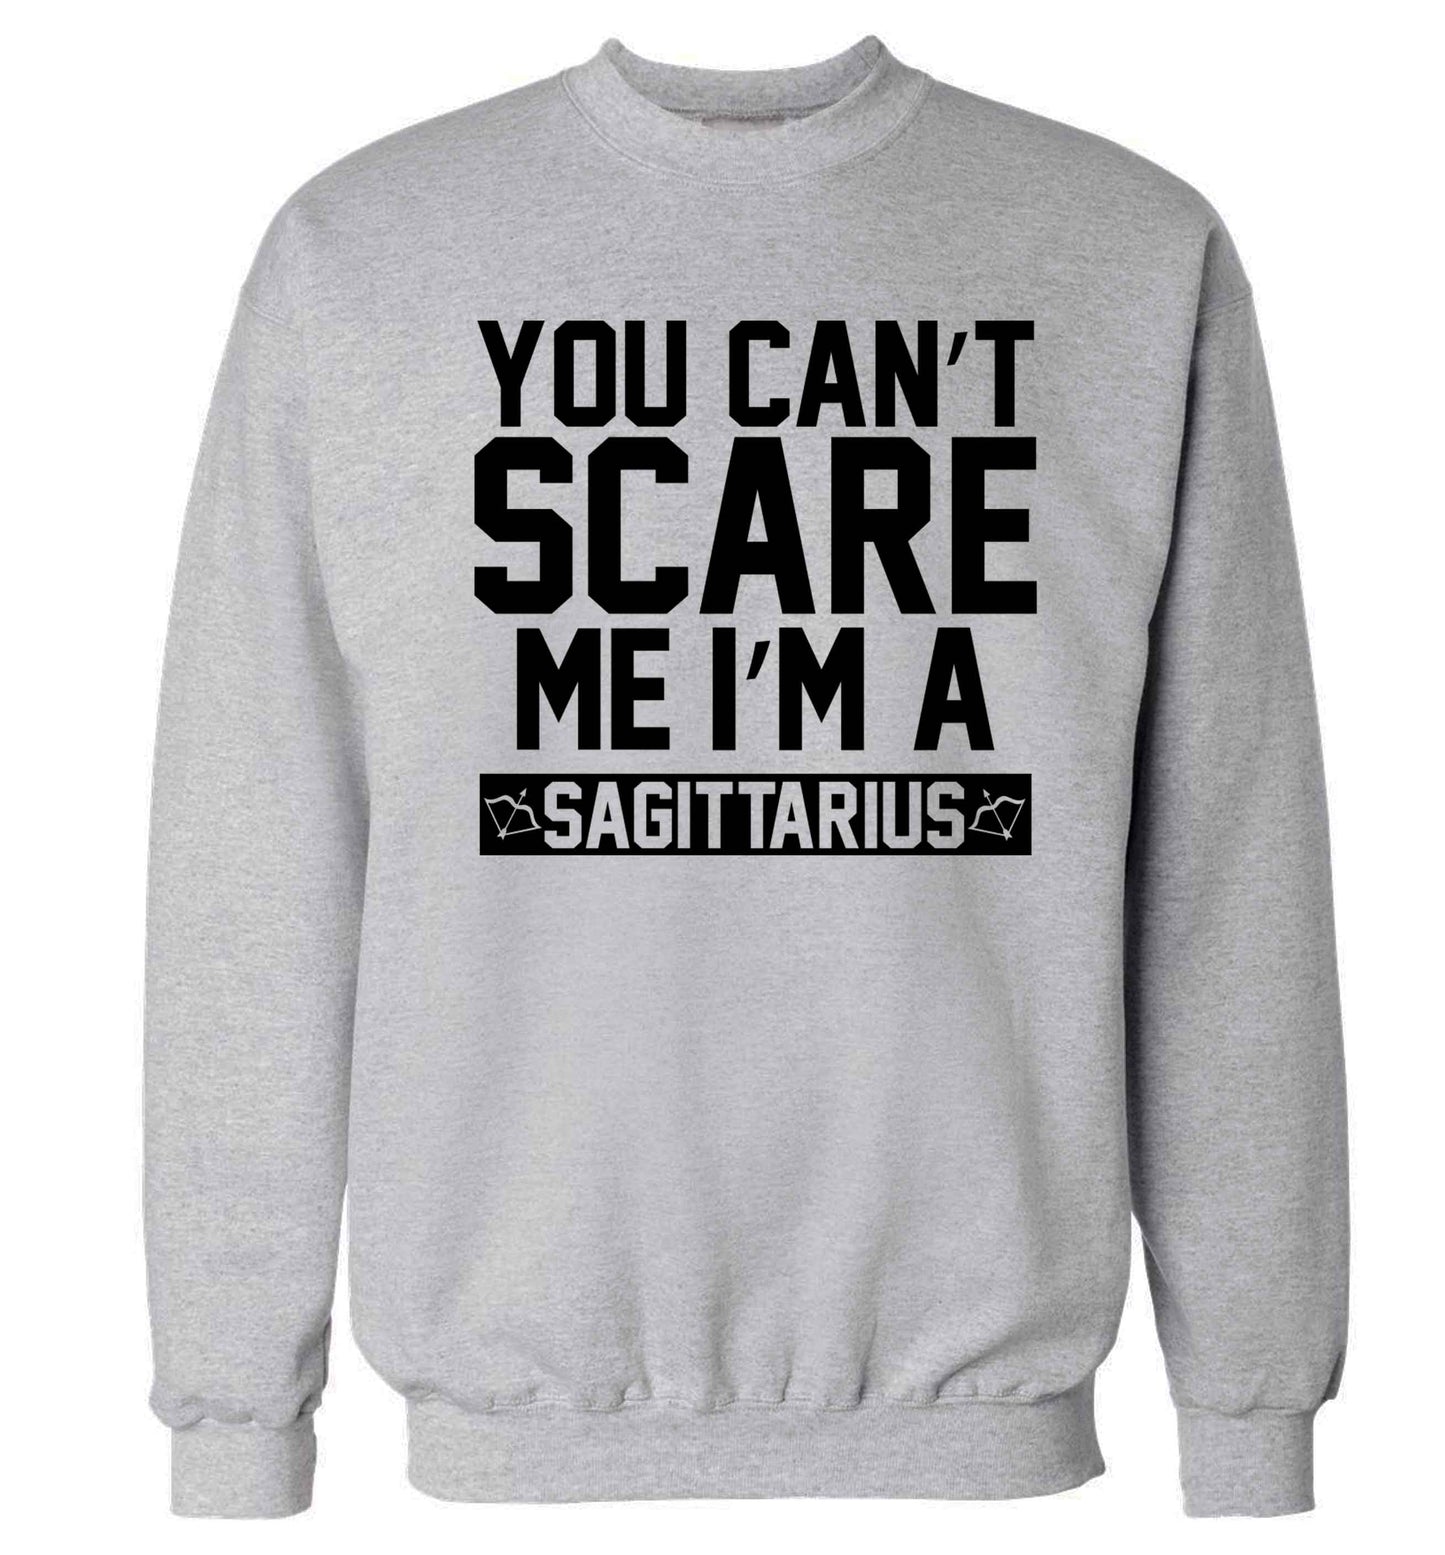 You can't scare me I'm a sagittarius Adult's unisex grey Sweater 2XL